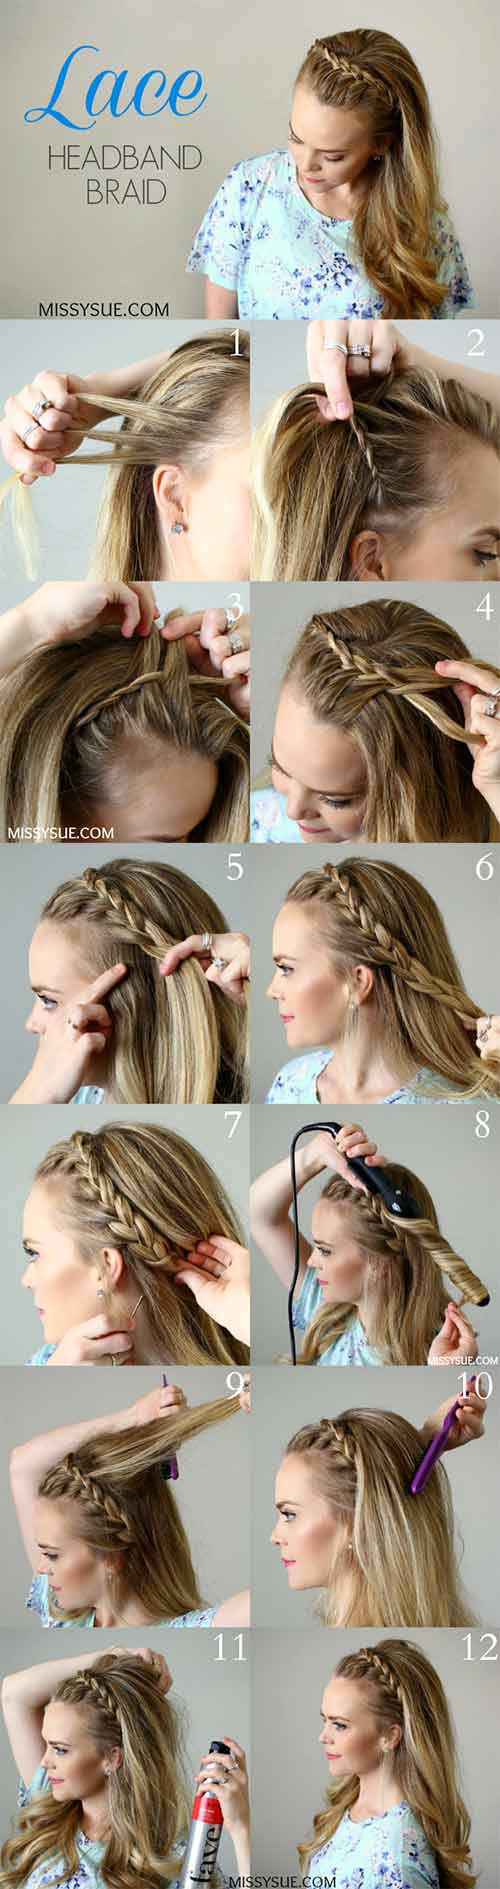 Lace braid headband hairstyles for girls